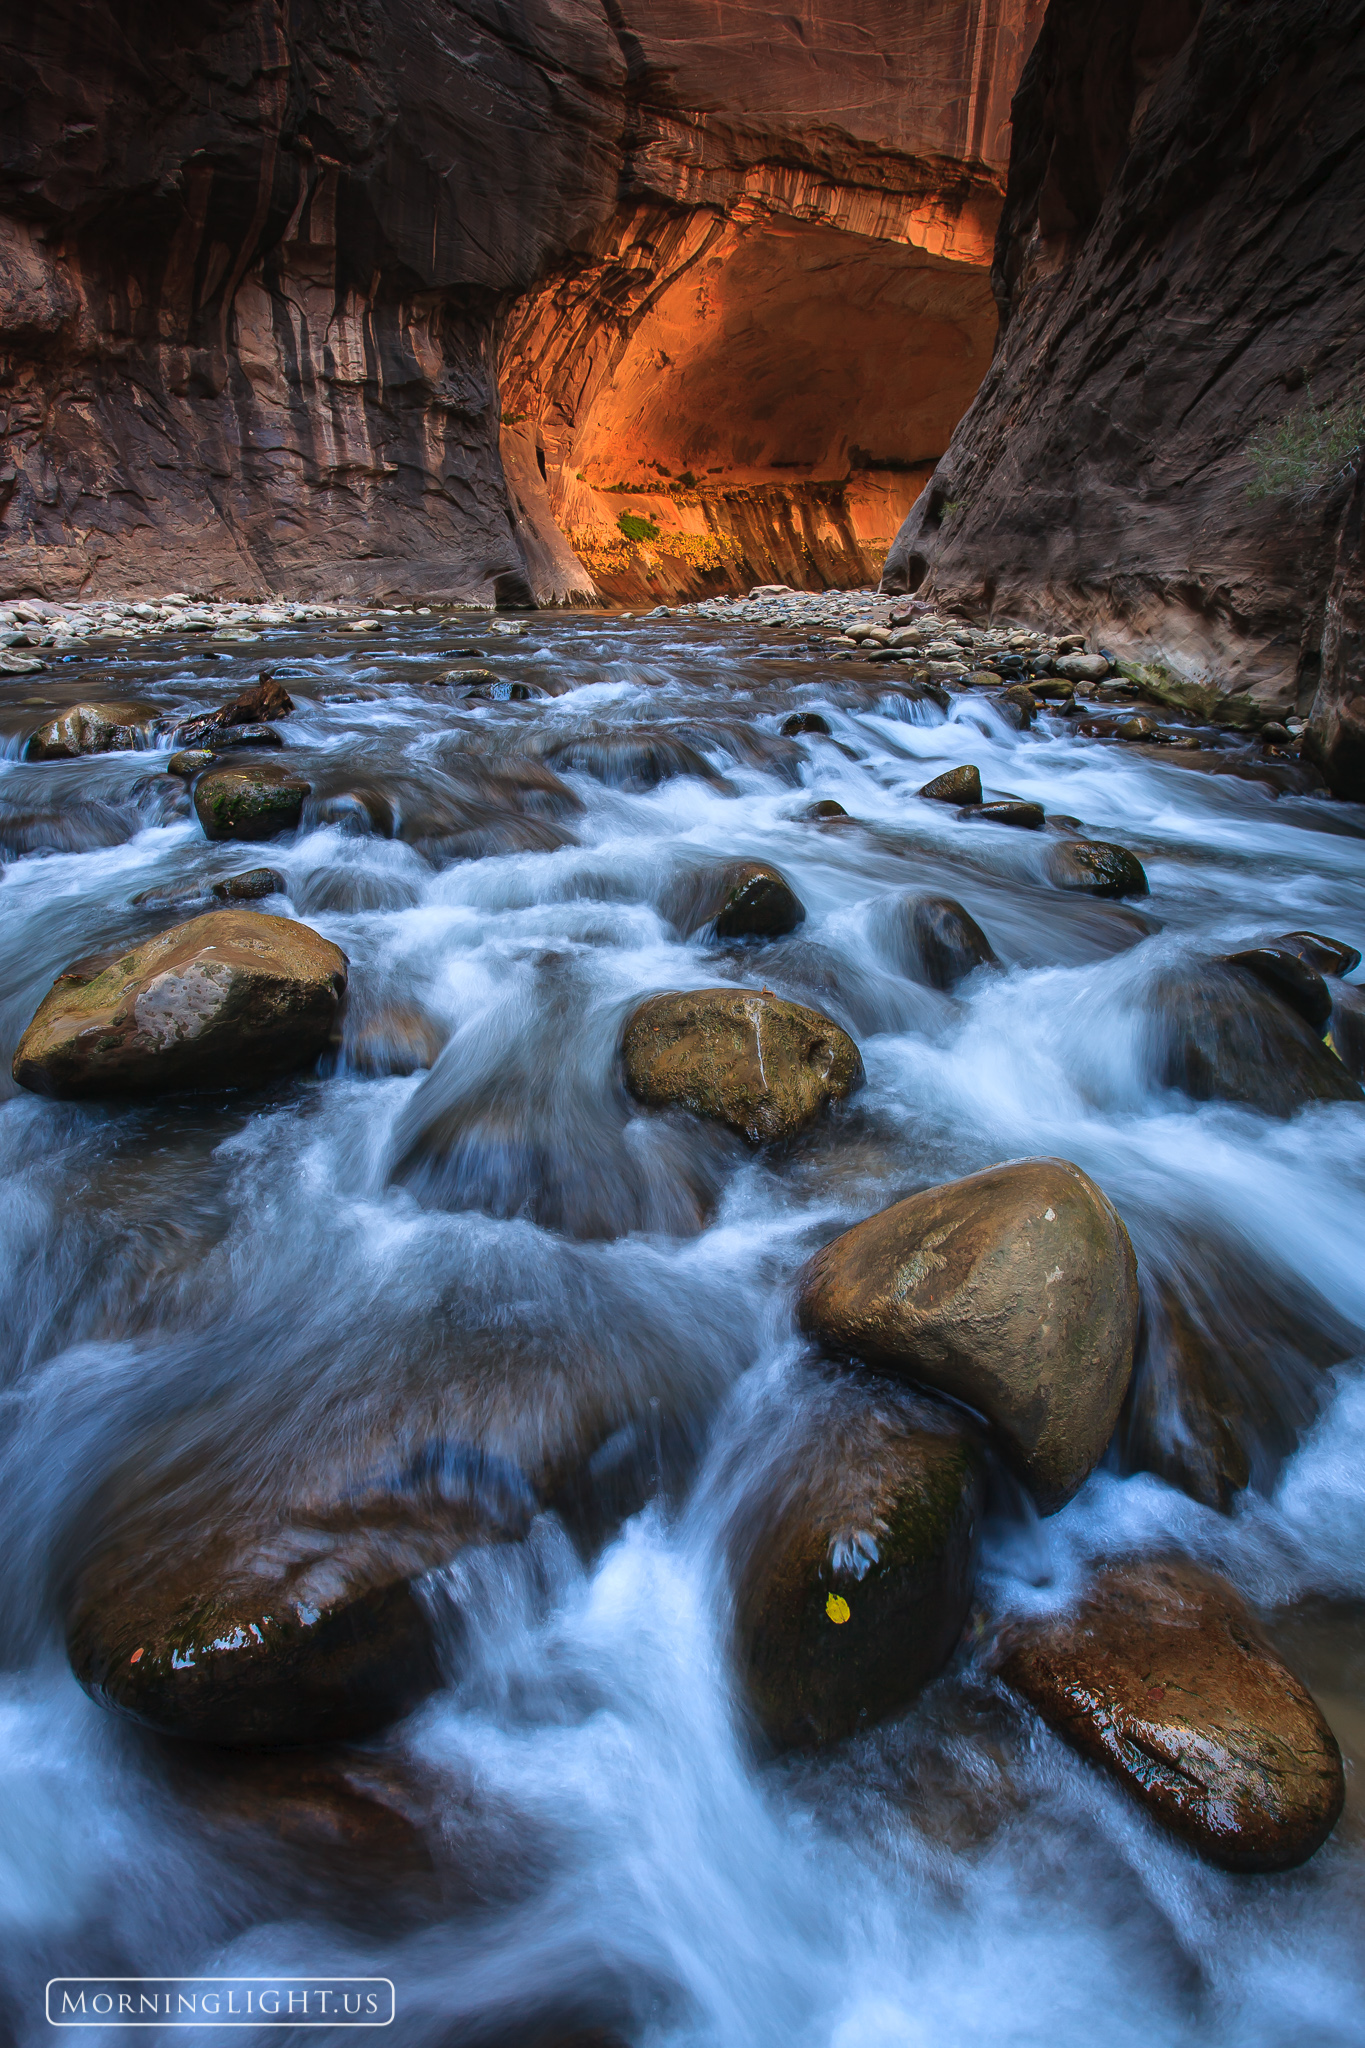 On my way out of the Narrows in Zion National Park I stopped below this cascade to enjoy the reflected glow on the walls behind...